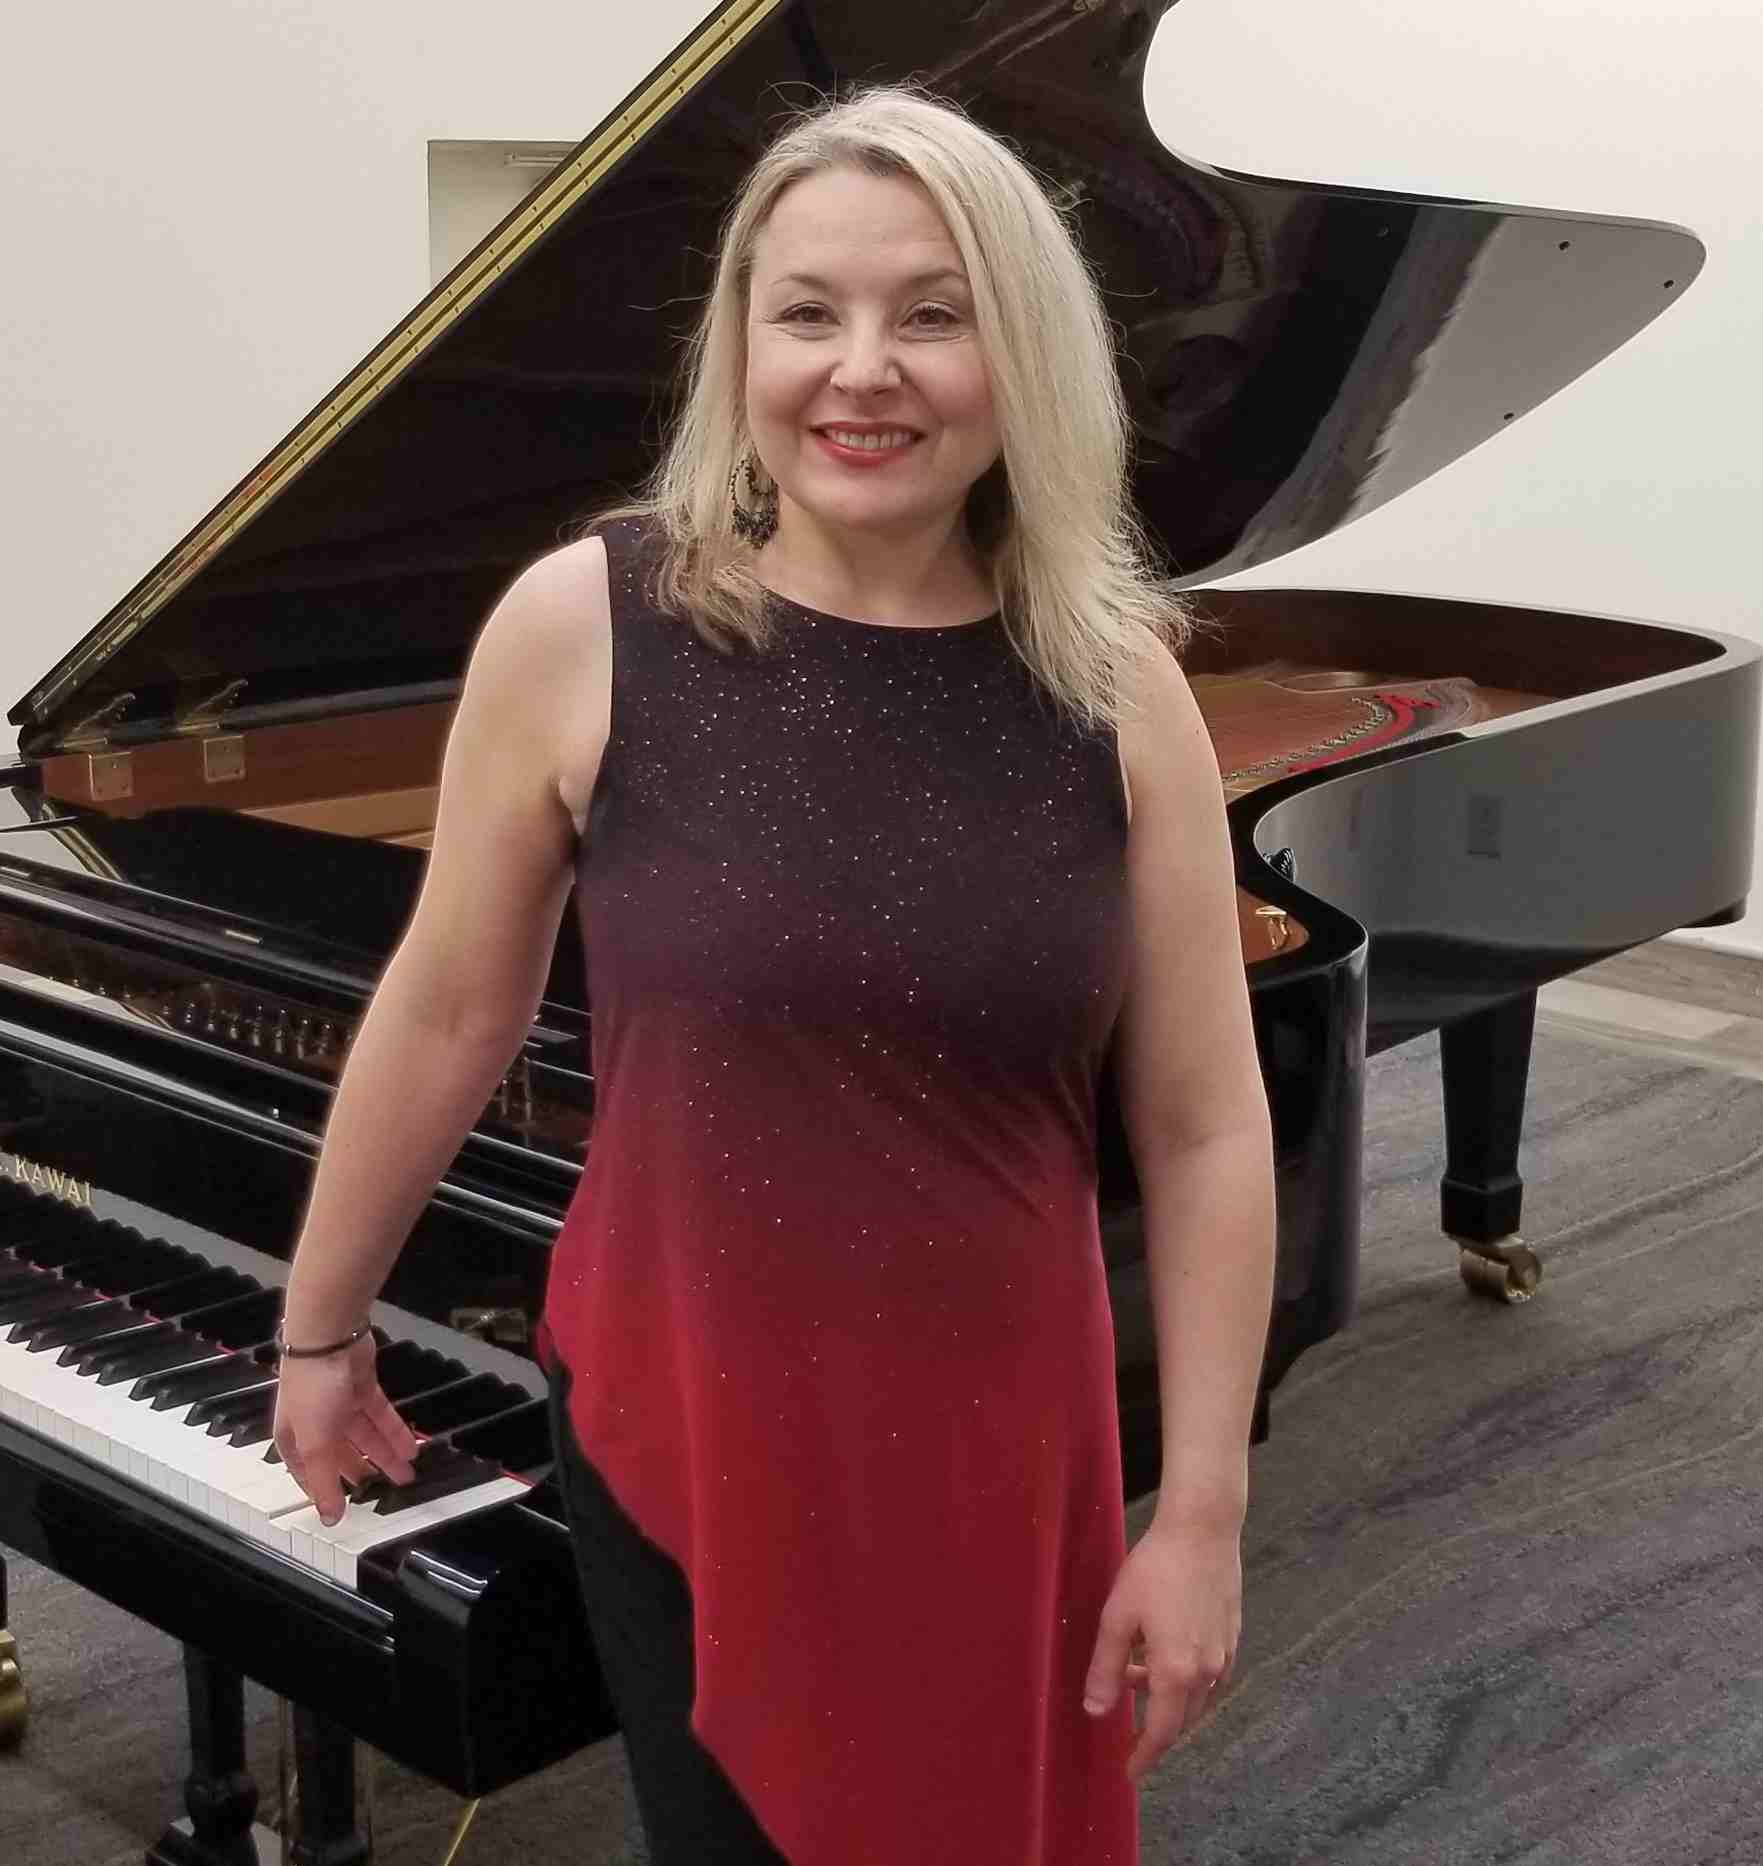 "I truly believe that the first stage of piano studies is the most important one in developing musicians. It's like planting a seed in the soil that could grow into a big tree or dry out and die in the ground." ~ Anna Artobolevskaya